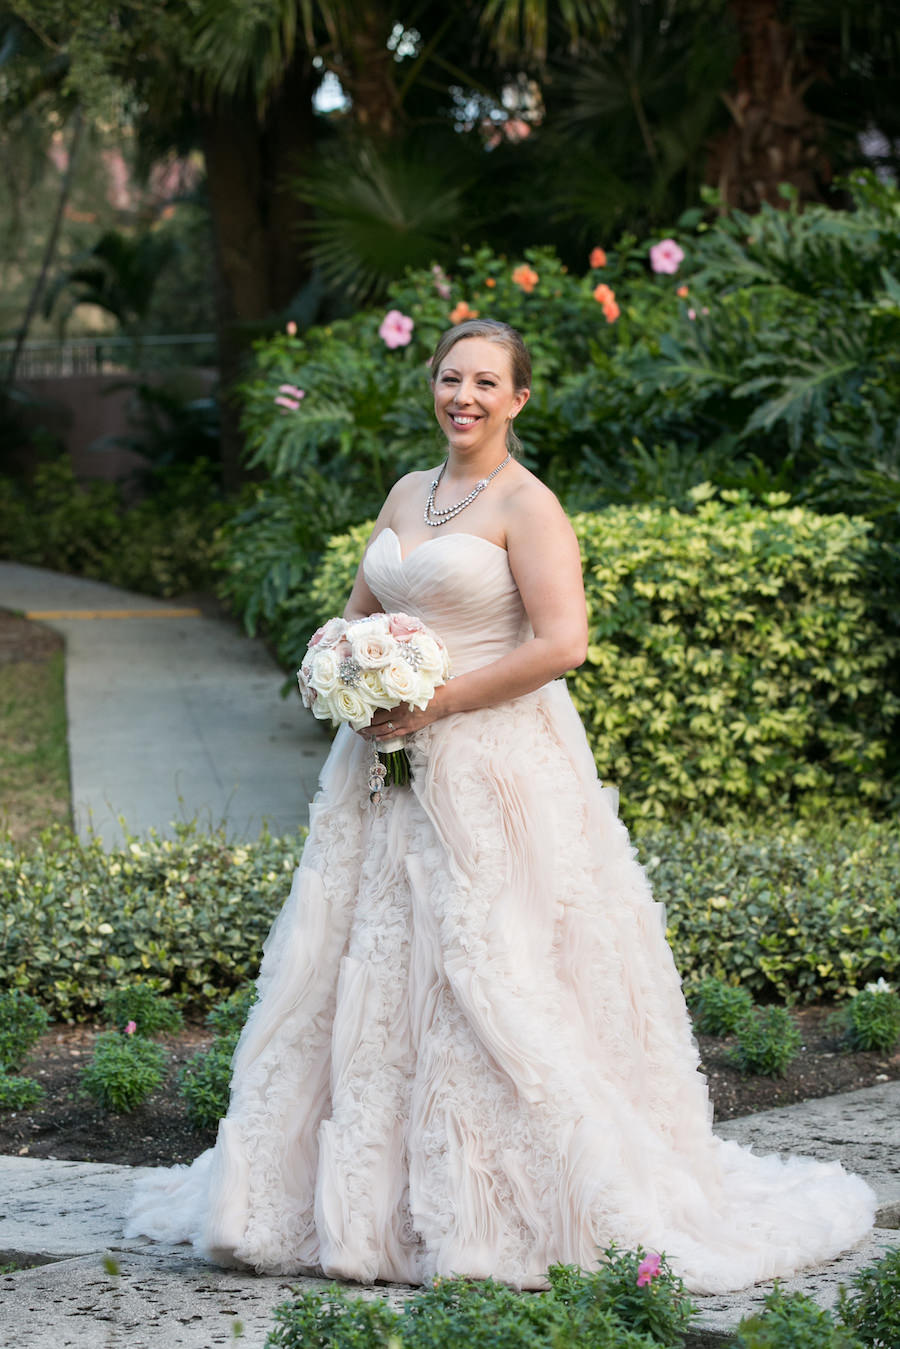 Bridal Wedding Portrait in Blush Madison James Wedding Dress with Ivory and Blush Wedding Bouquet of Roses | St. Petersburg Wedding Photographer Carrie Wildes Photography